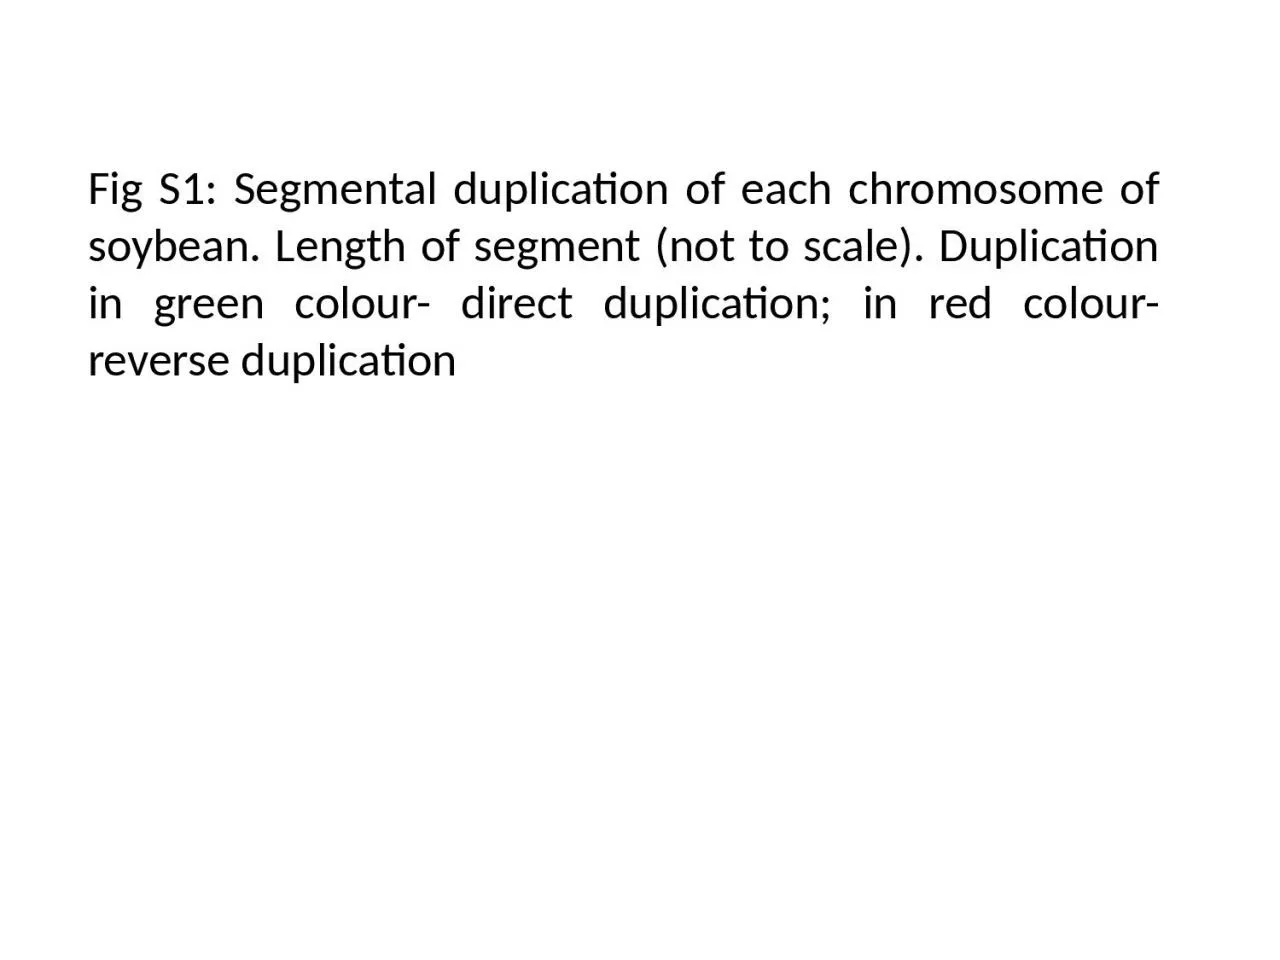 Fig S1: Segmental duplication of each chromosome of soybean. Length of segment (not to